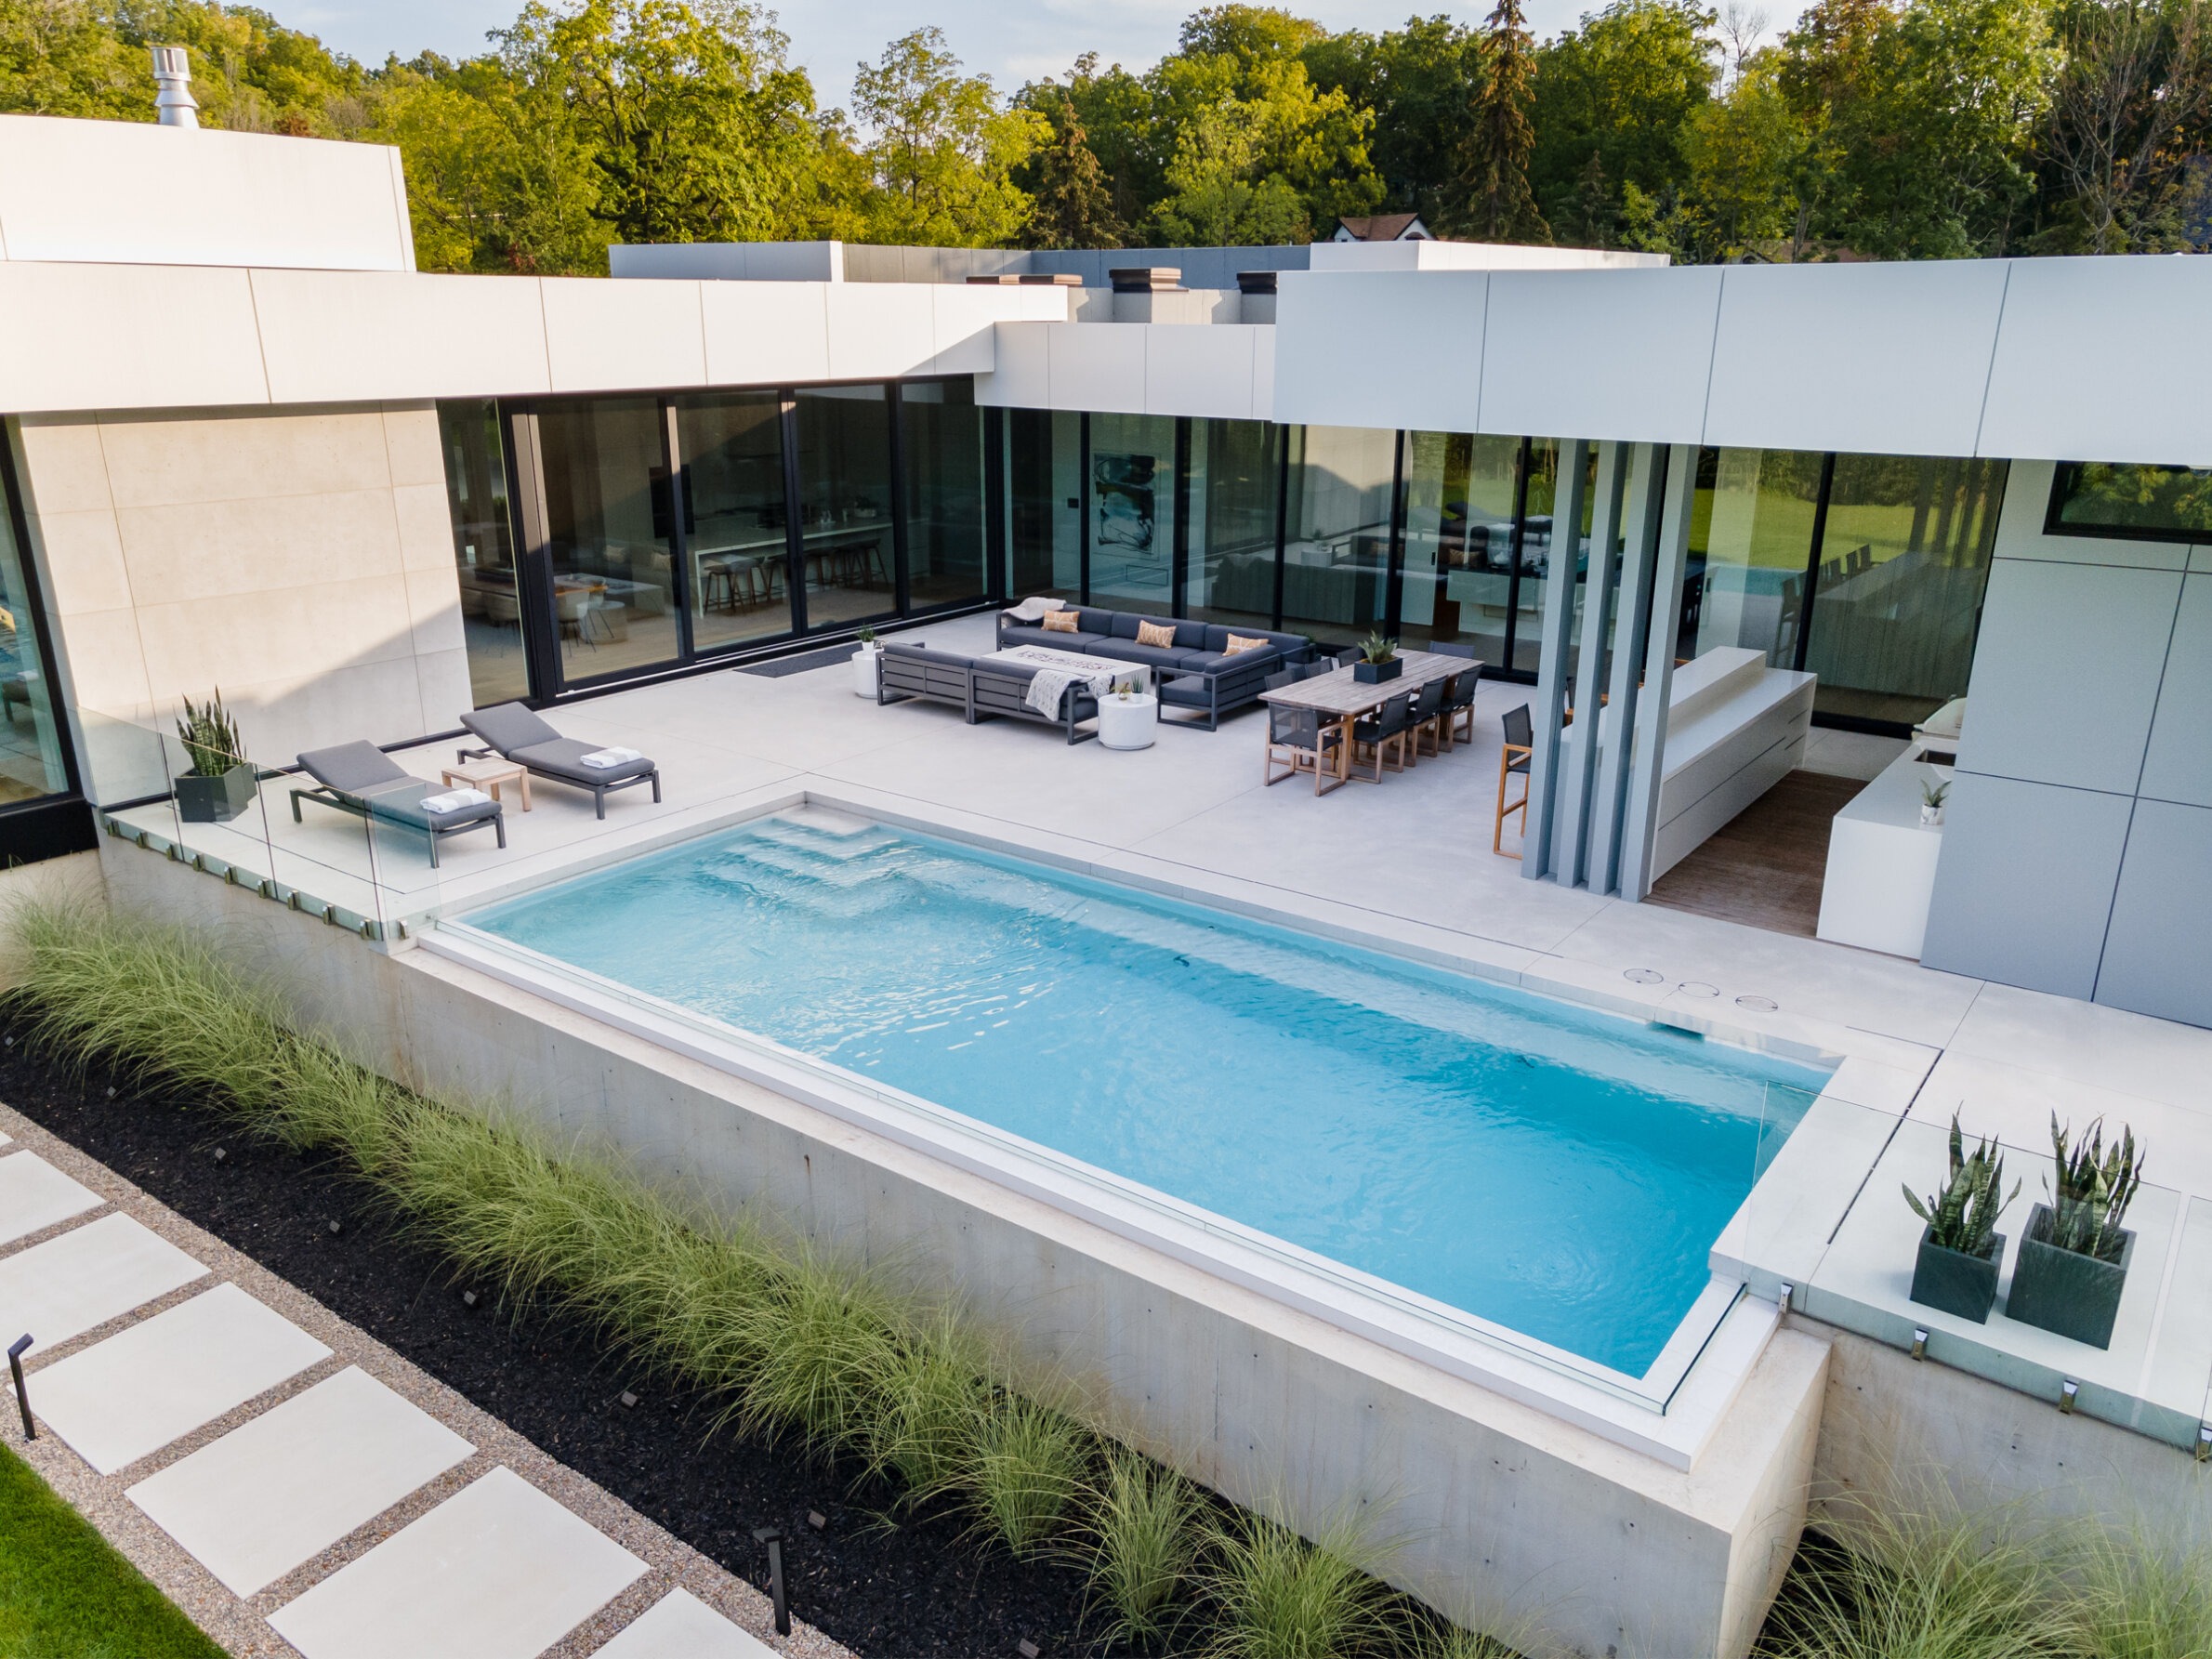 Modern house with large windows, outdoor furniture on patio, rectangular swimming pool, and landscaped garden. Luxurious setting with contemporary design.